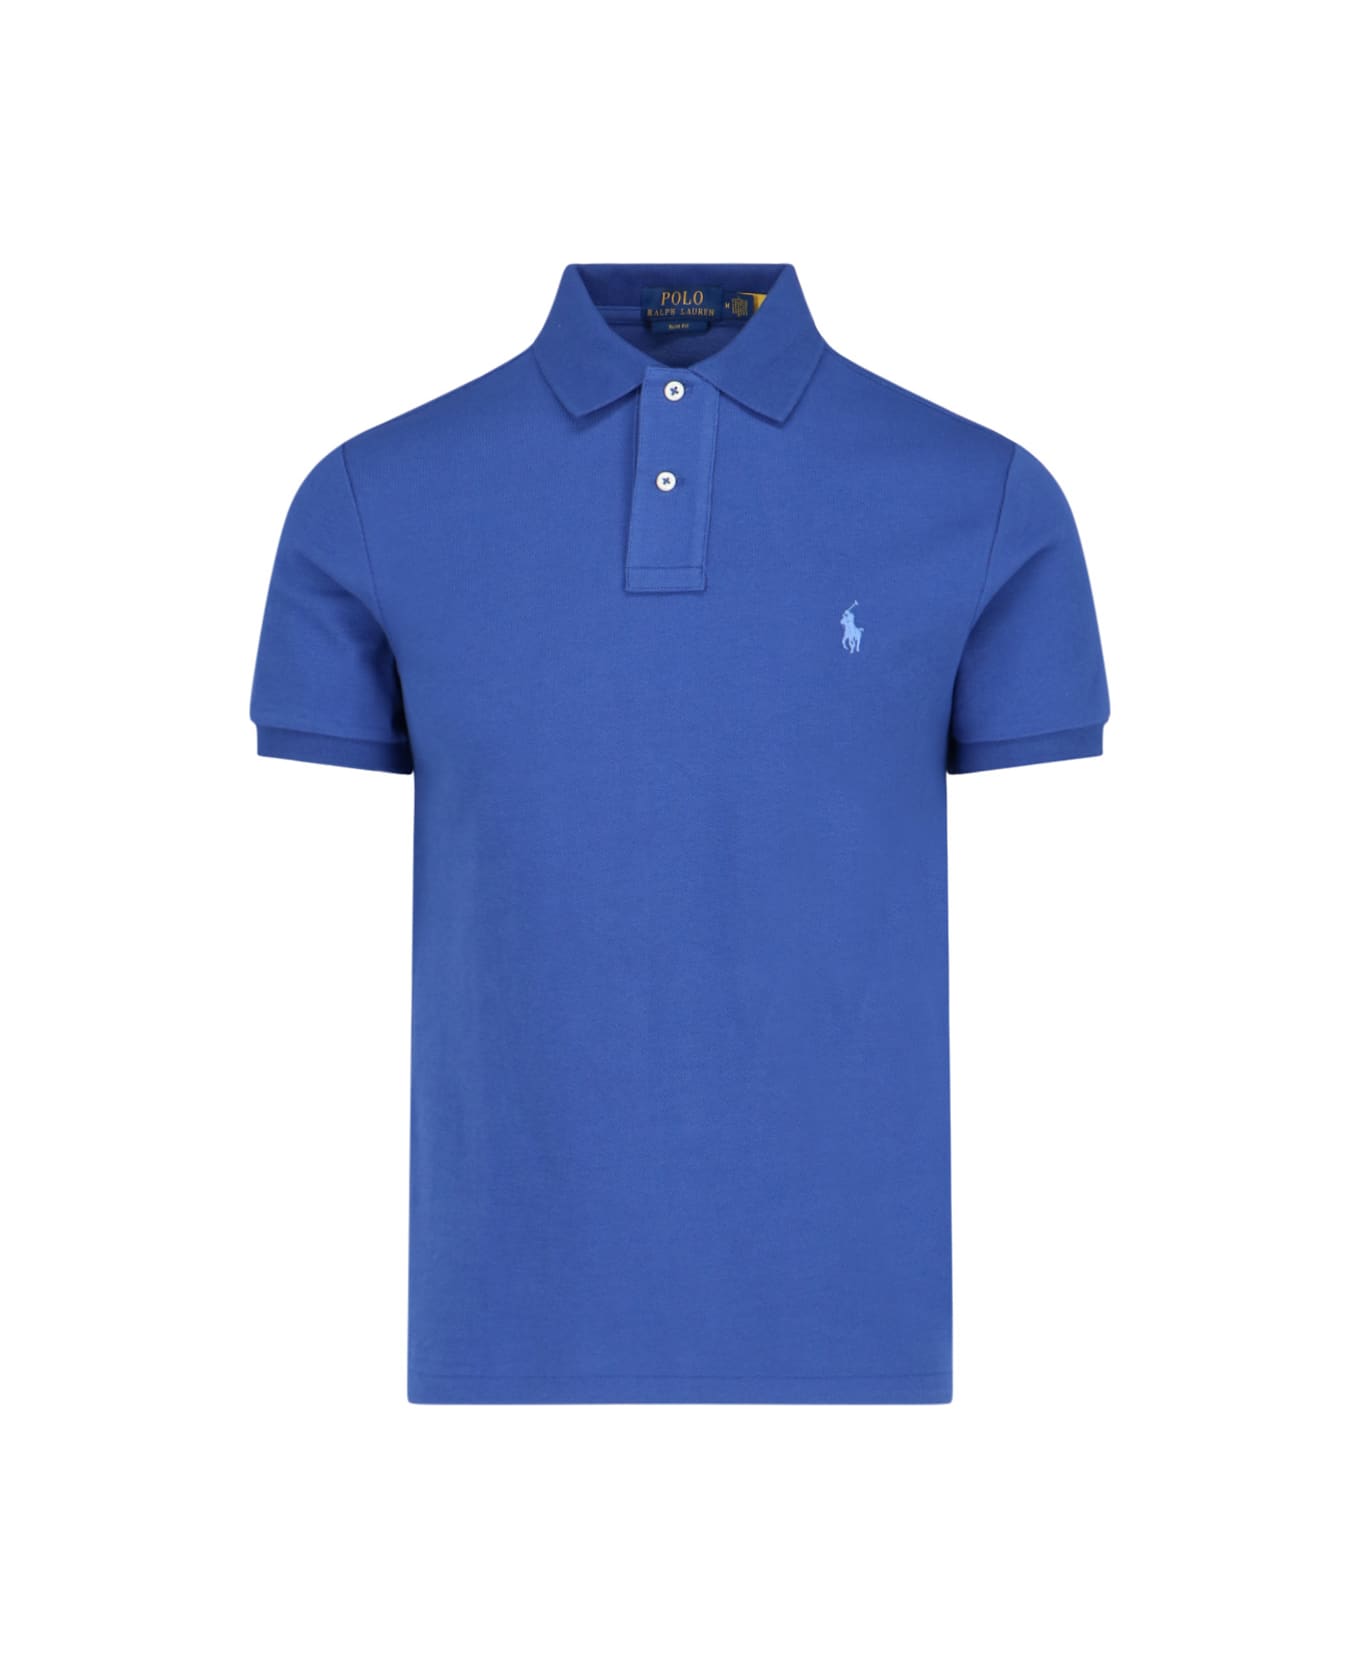 Polo Ralph Lauren Polo Shirt With Embroidery - Blue